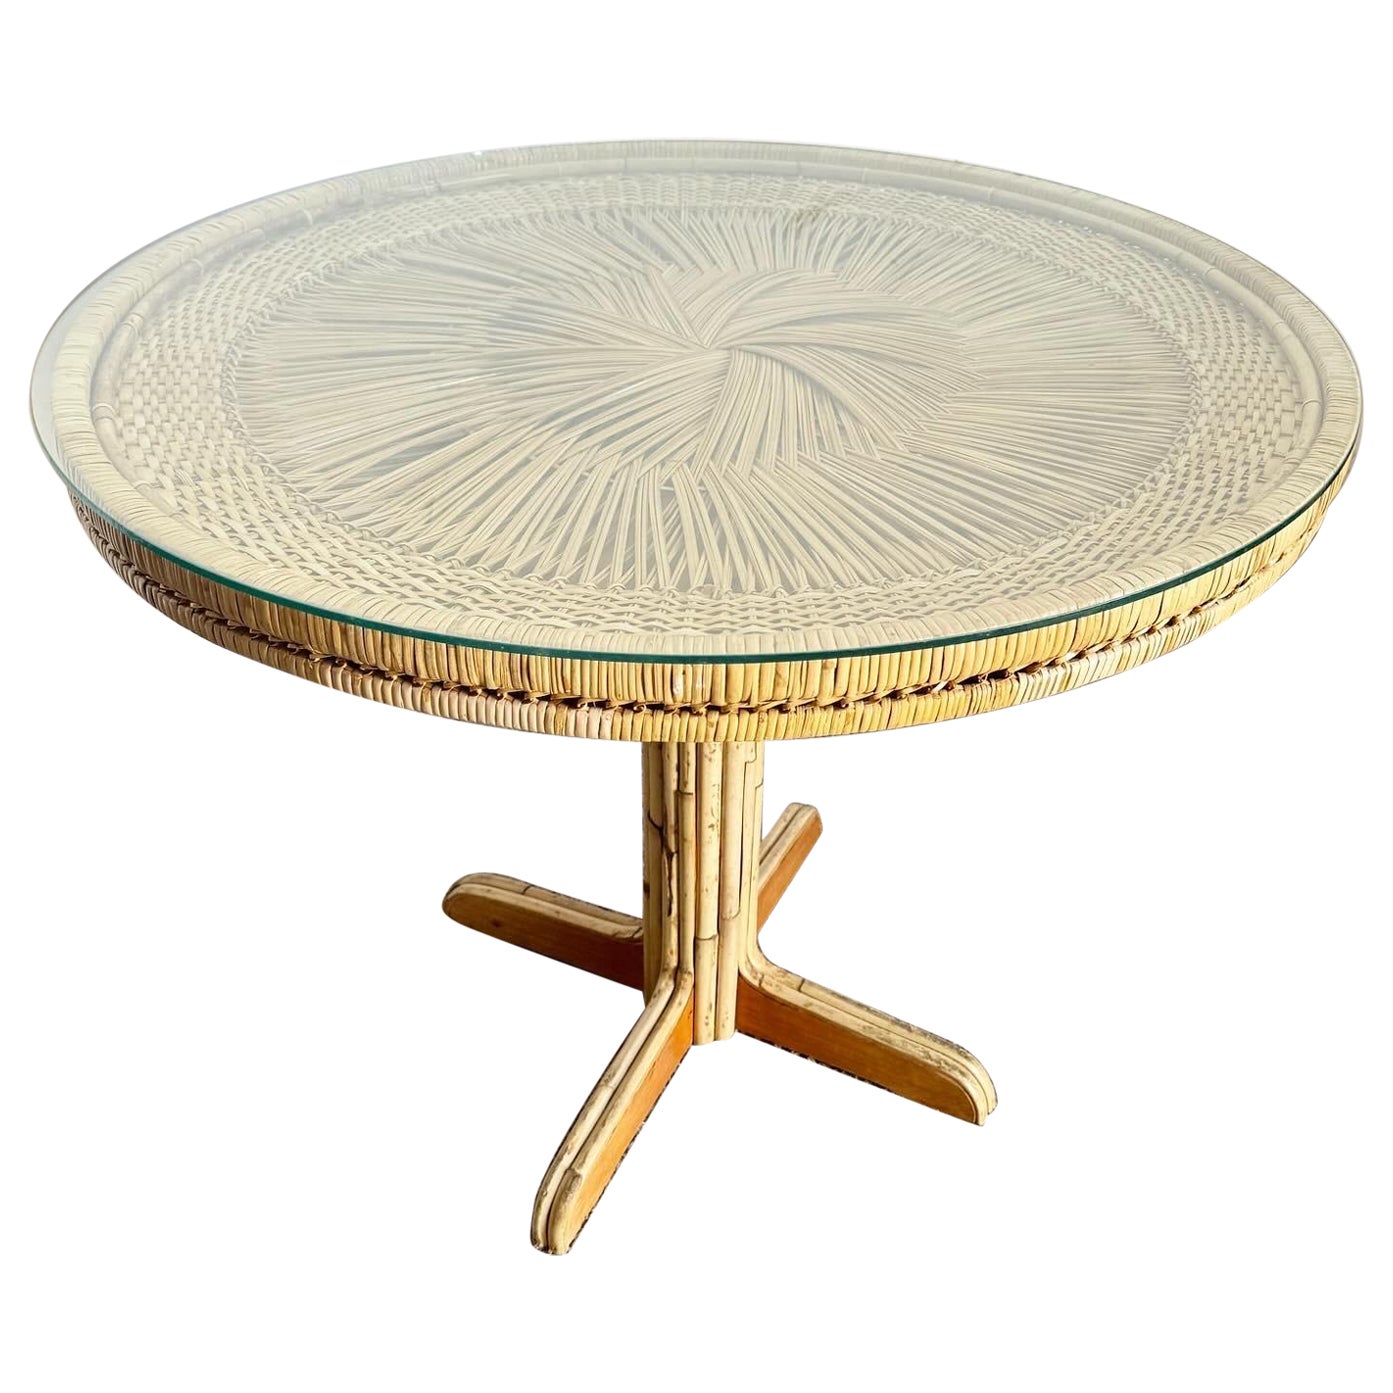 Boho Chic Buri Rattan Top Bamboo Glass Top Dining Table For Sale